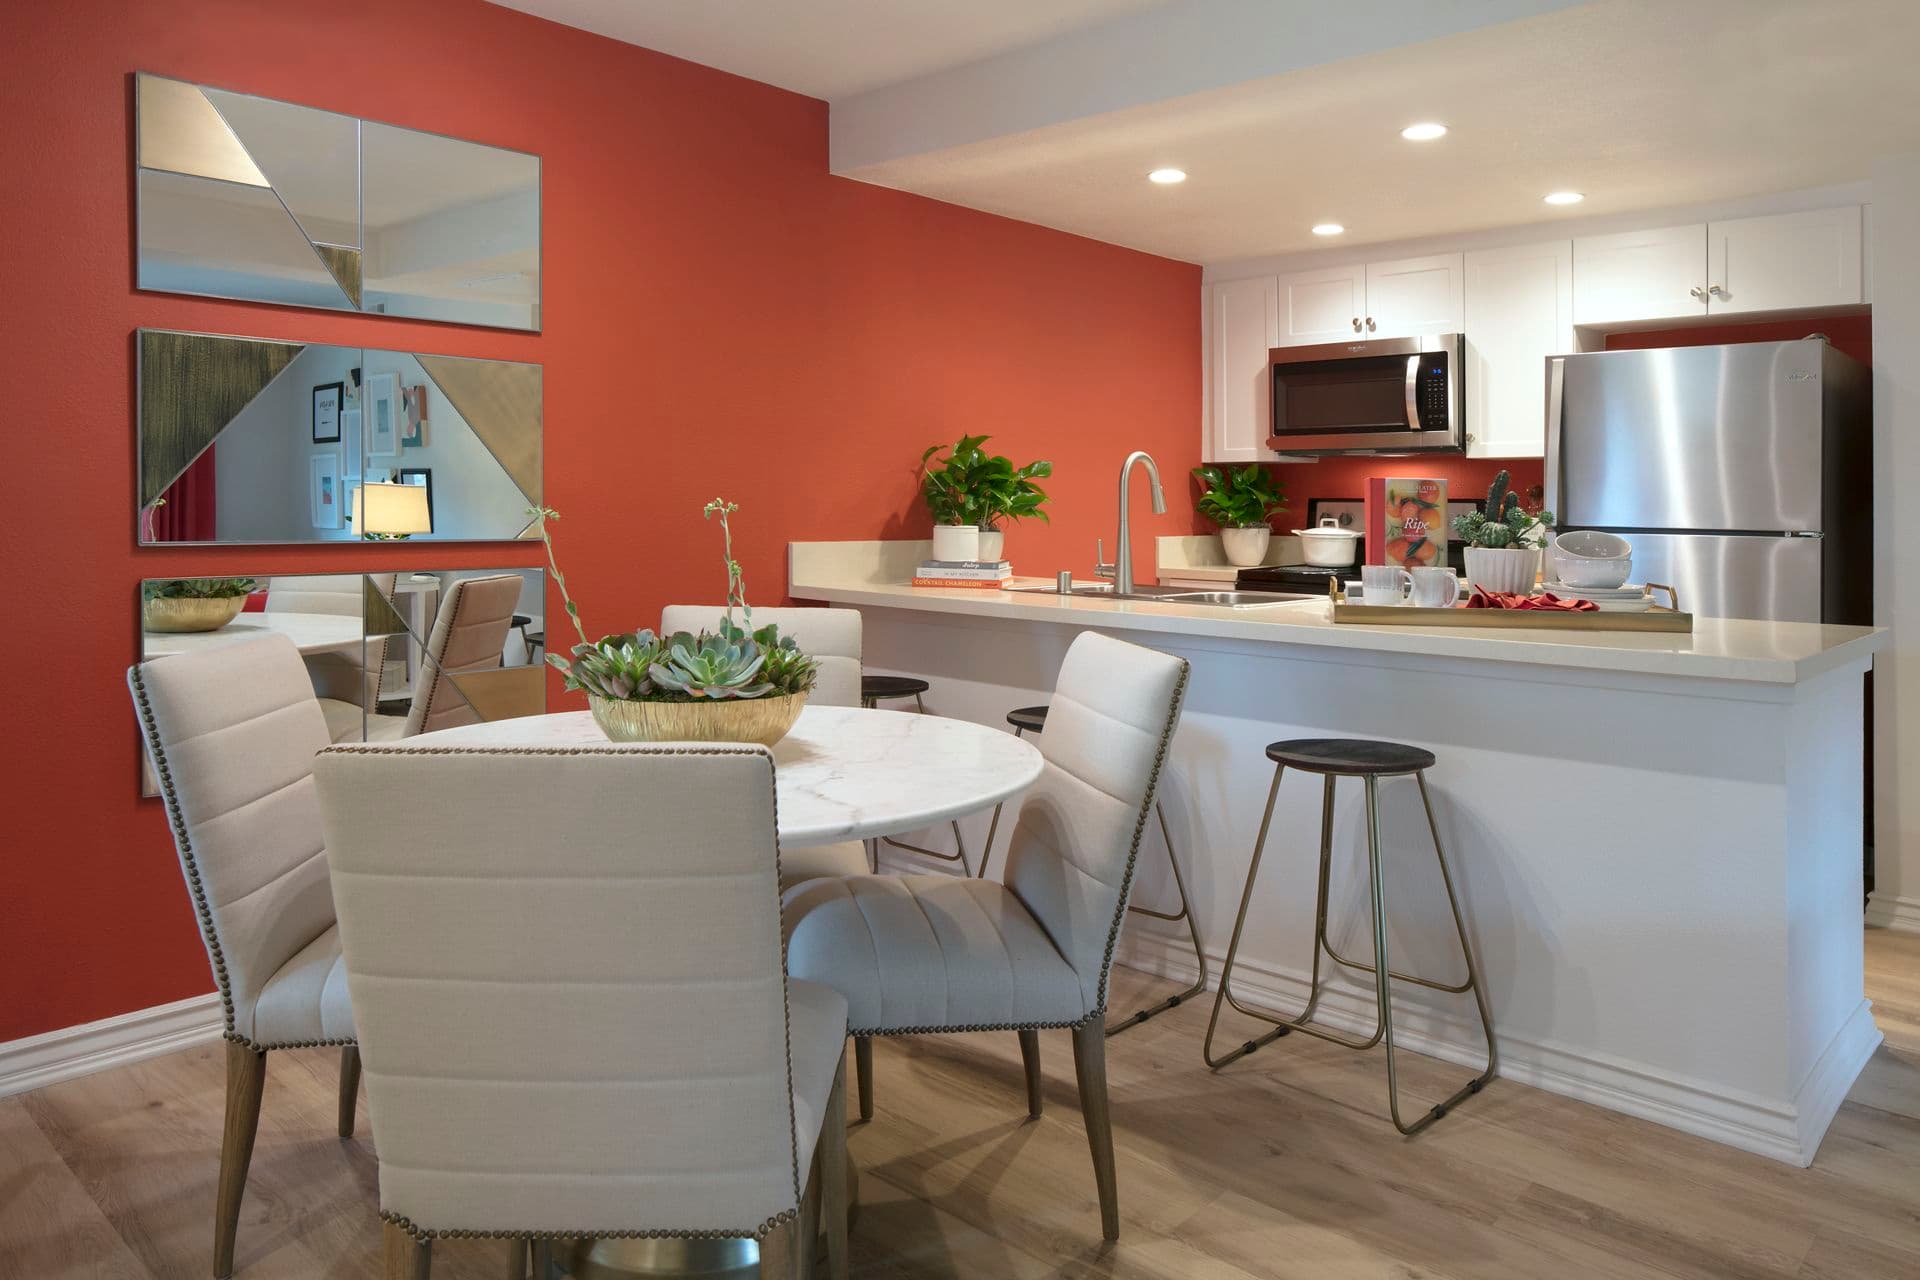 Interior view of dining and kitchen areas at Seascape Apartment Homes in Carlsbad, CA.